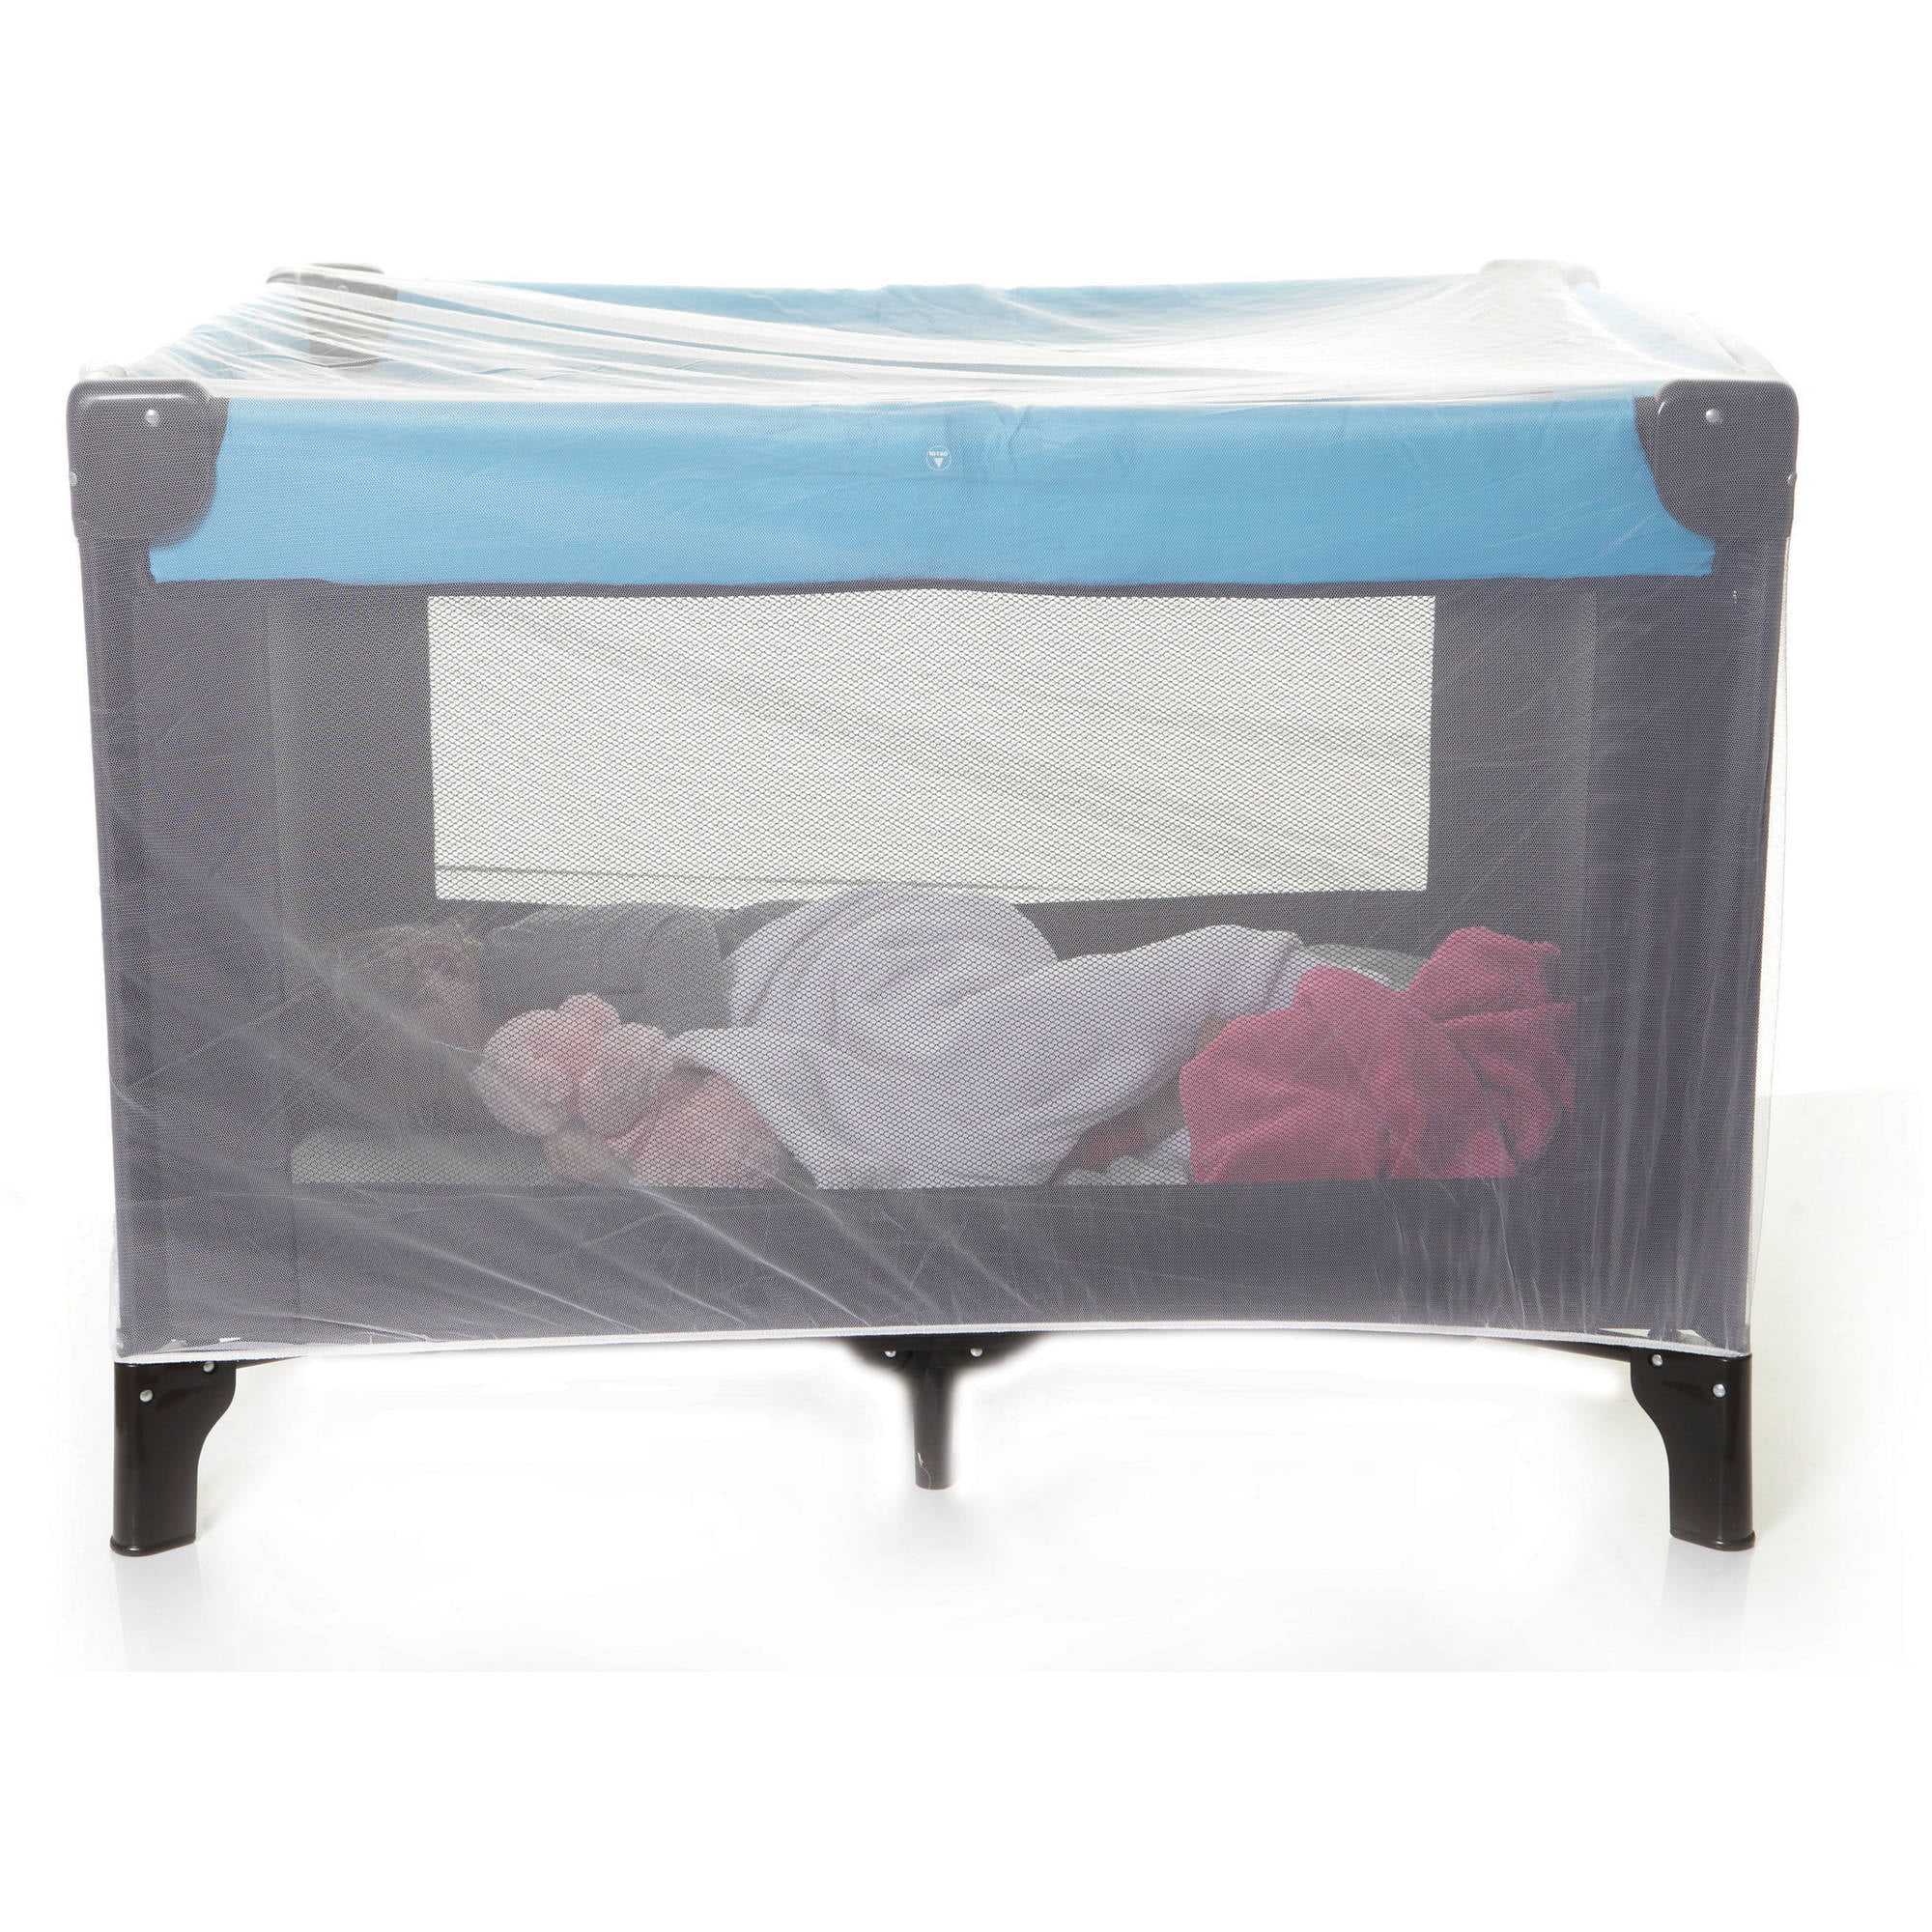 mosquito netting for playpen